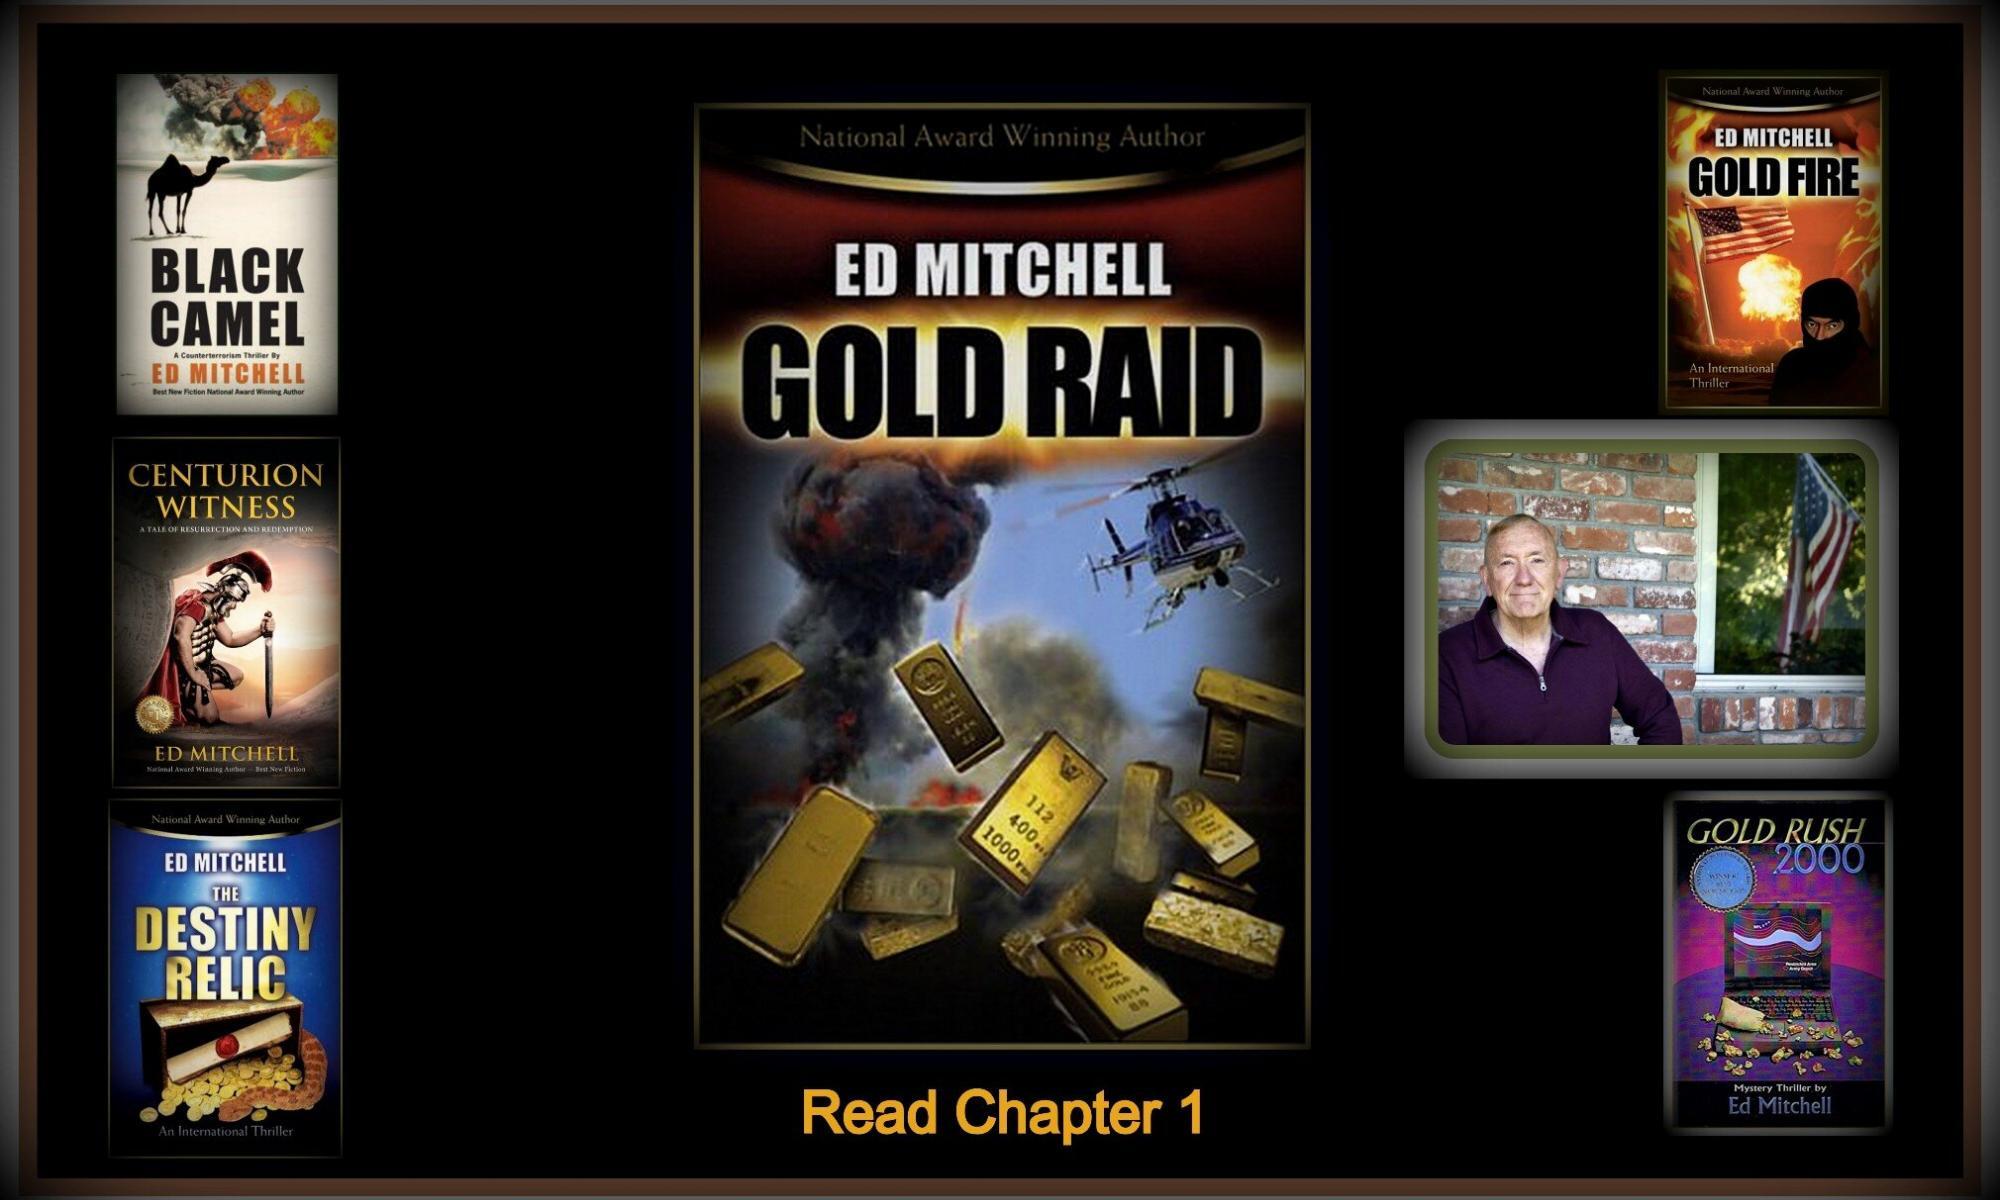 Gold Raid Read Chapter 1 - Author Ed Mitchell